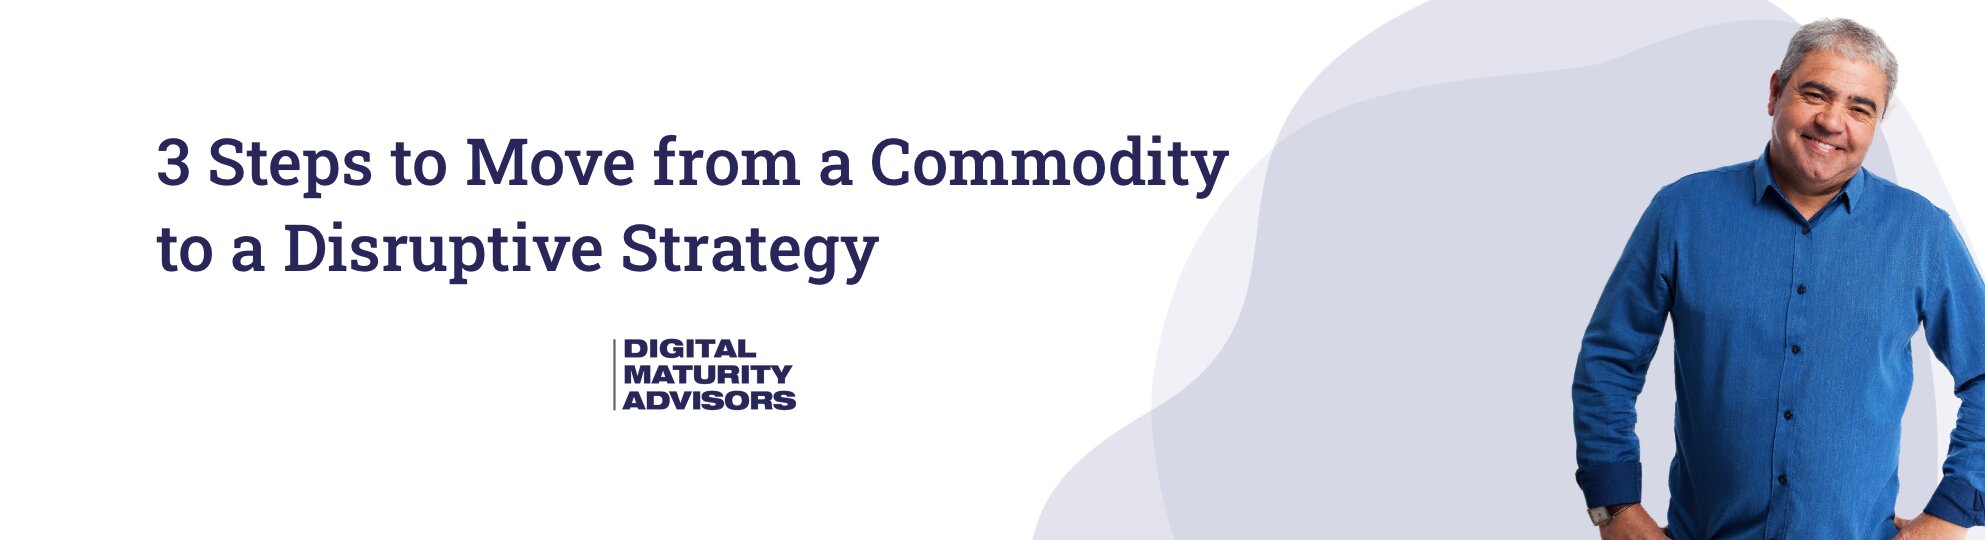 3_steps_to_move_from_a_commodity_to_a_disruptive_strategy-banner